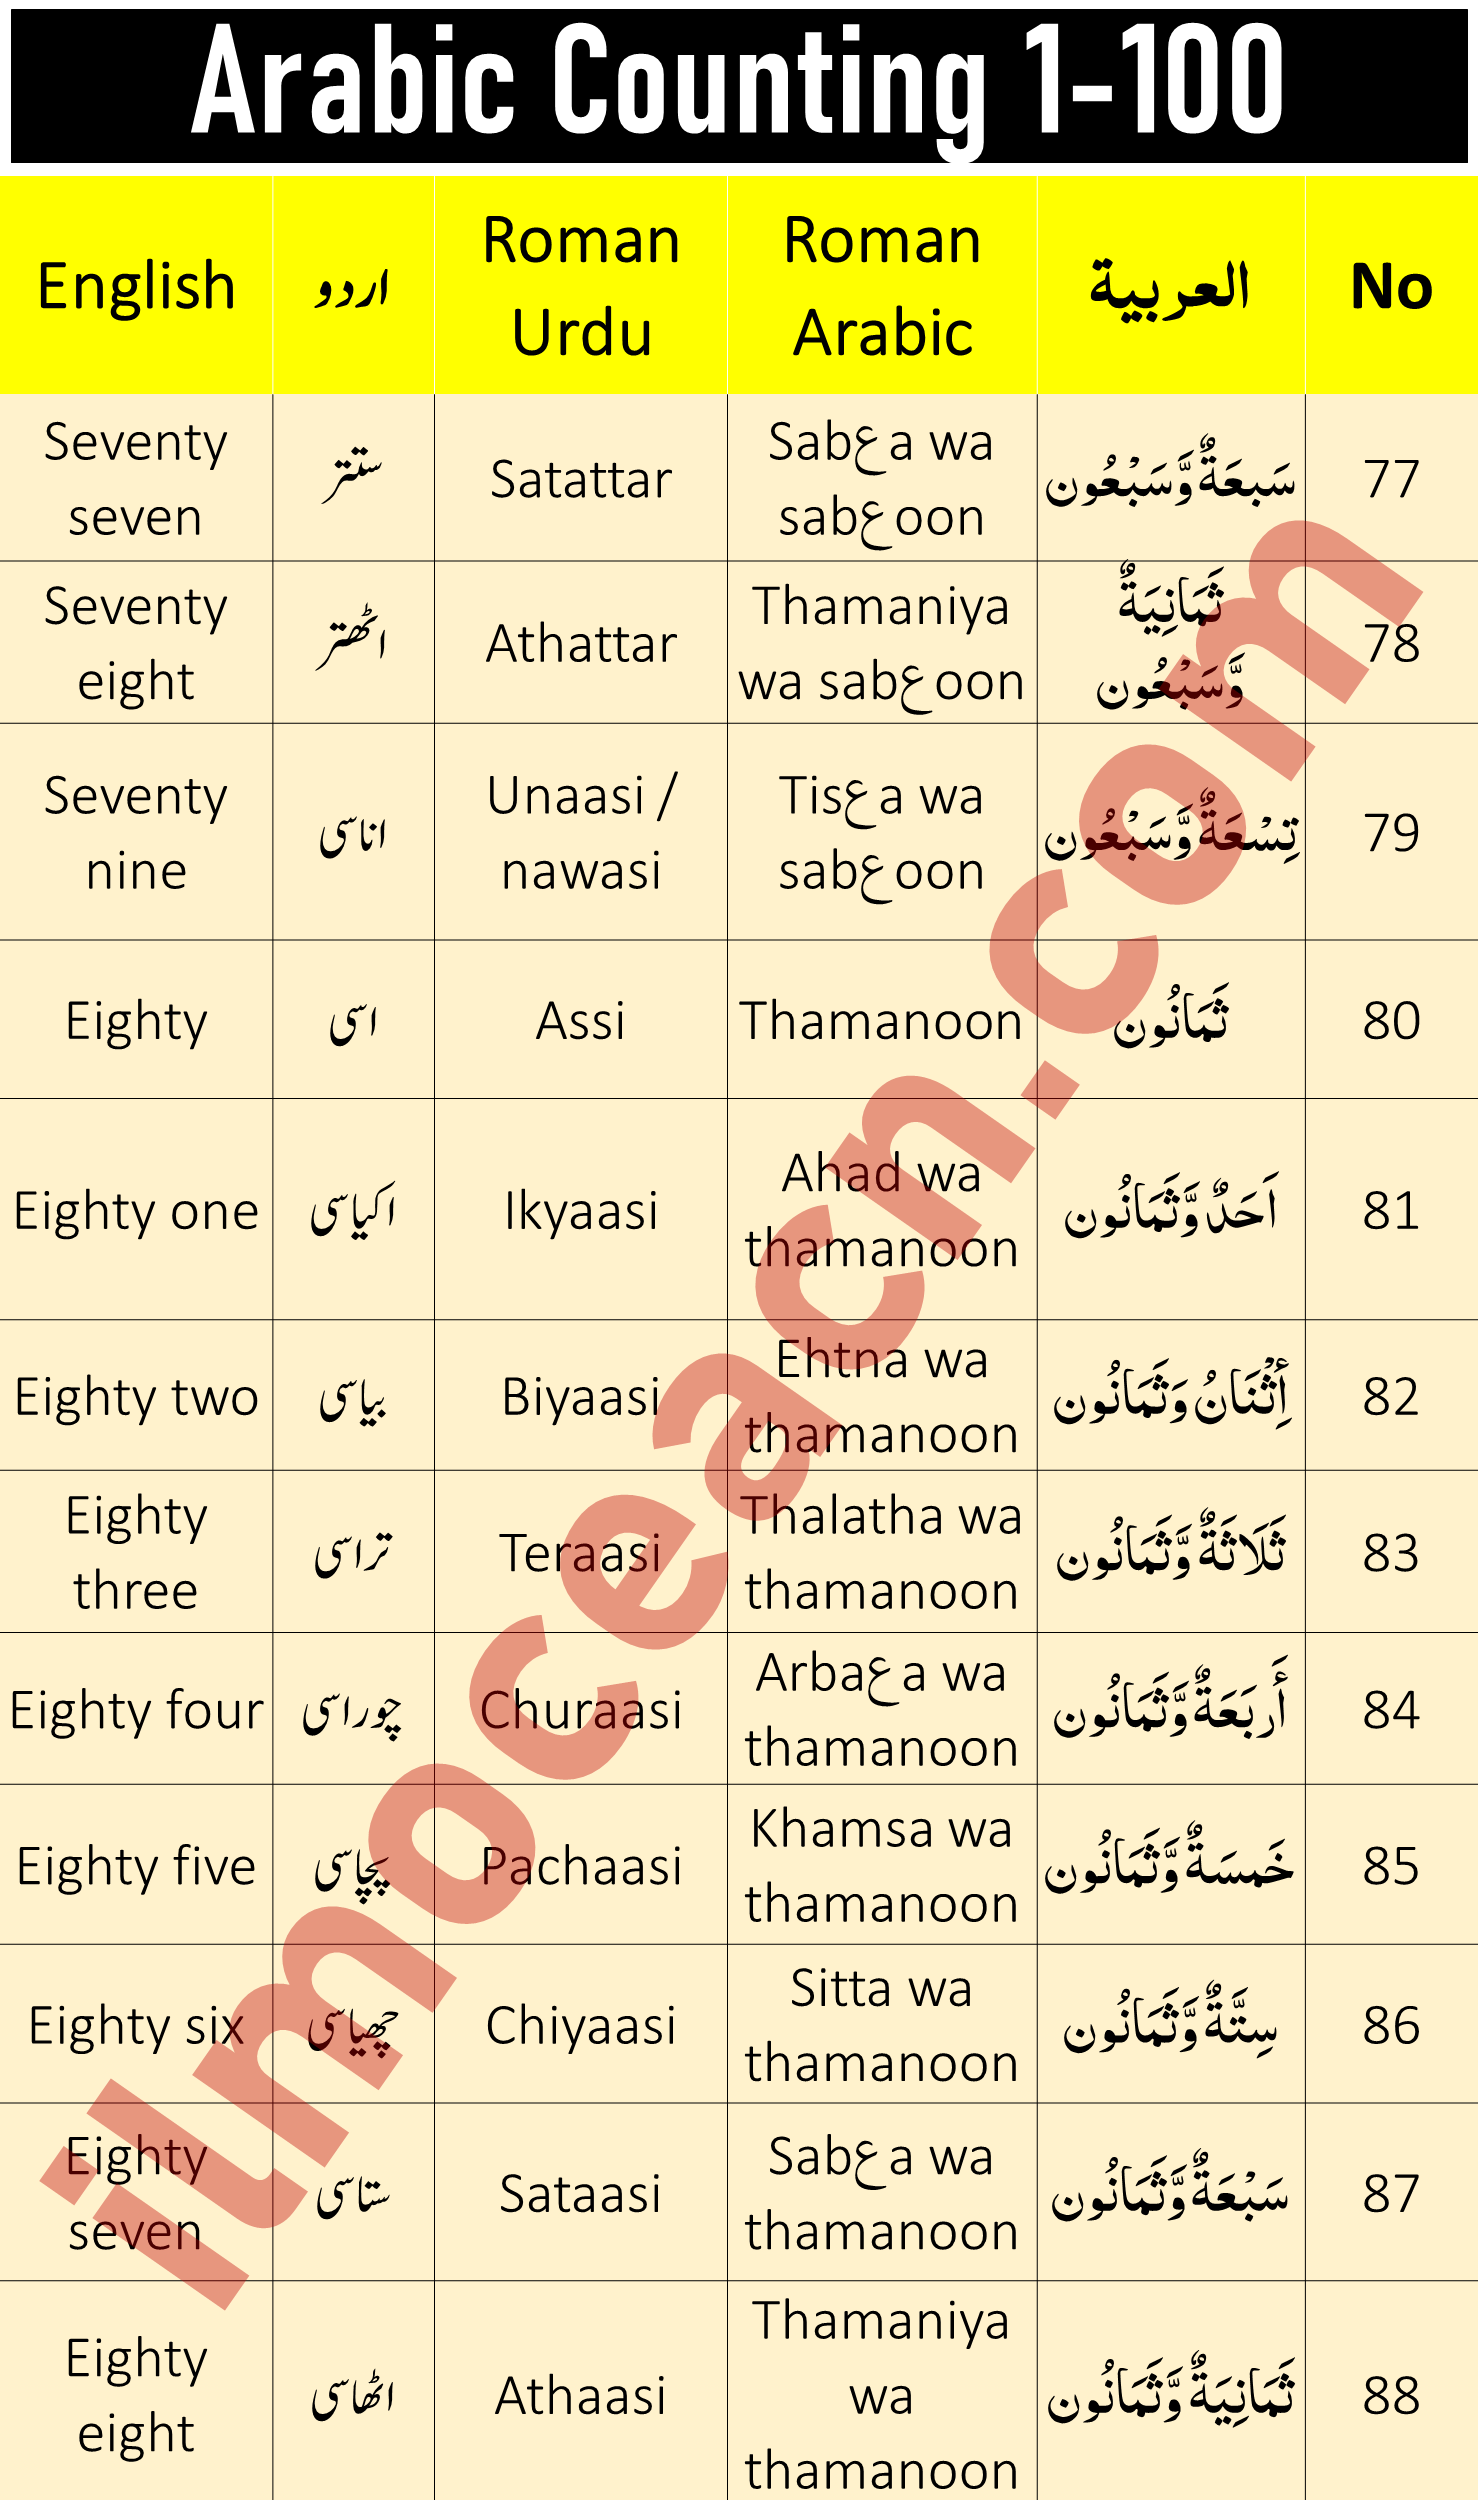 Counting is vital in learning any new language. Same is the case with Arabic as well. Here we are with Arabic numbers from One to Thousand, translated into English and Urdu. For readers' convenience, we've added roman Arabic and roman Urdu as well.